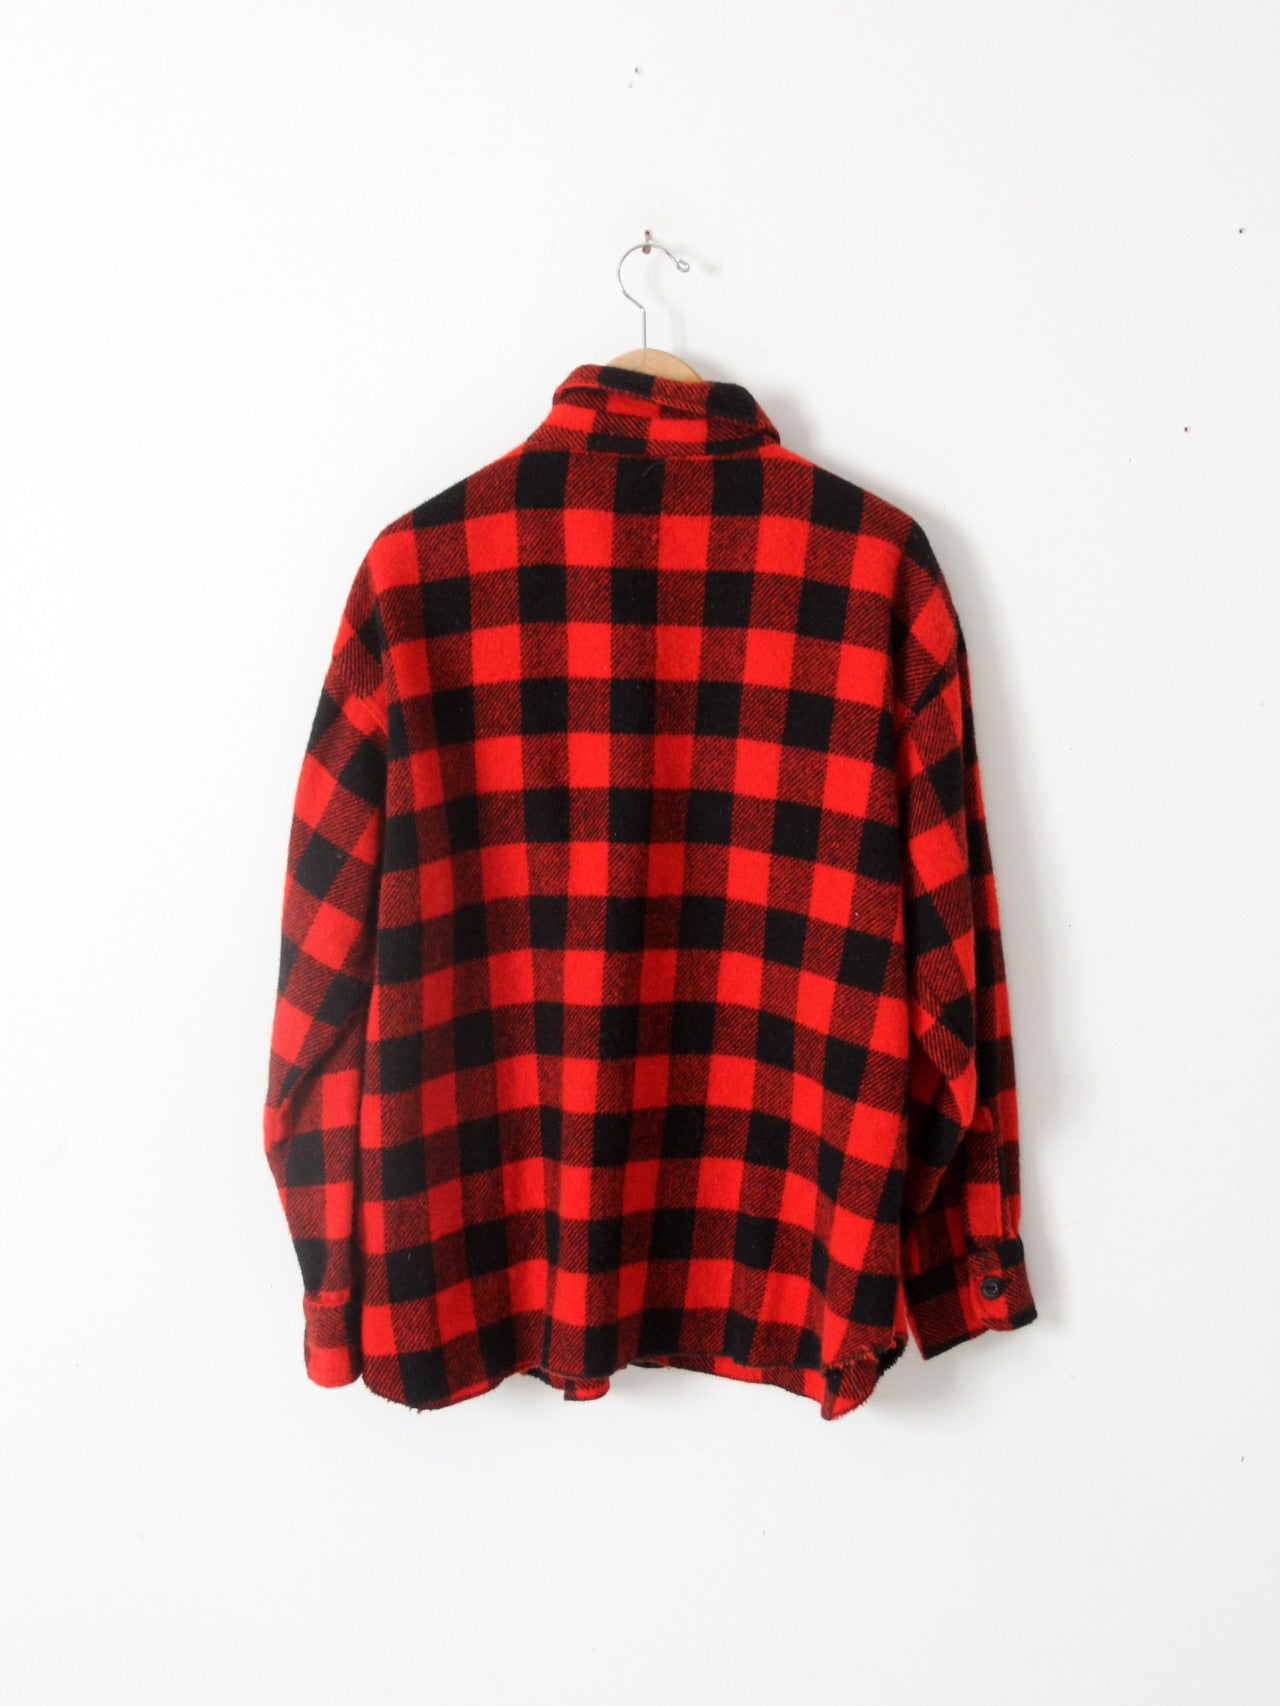 vintage 50s red flannel shirt